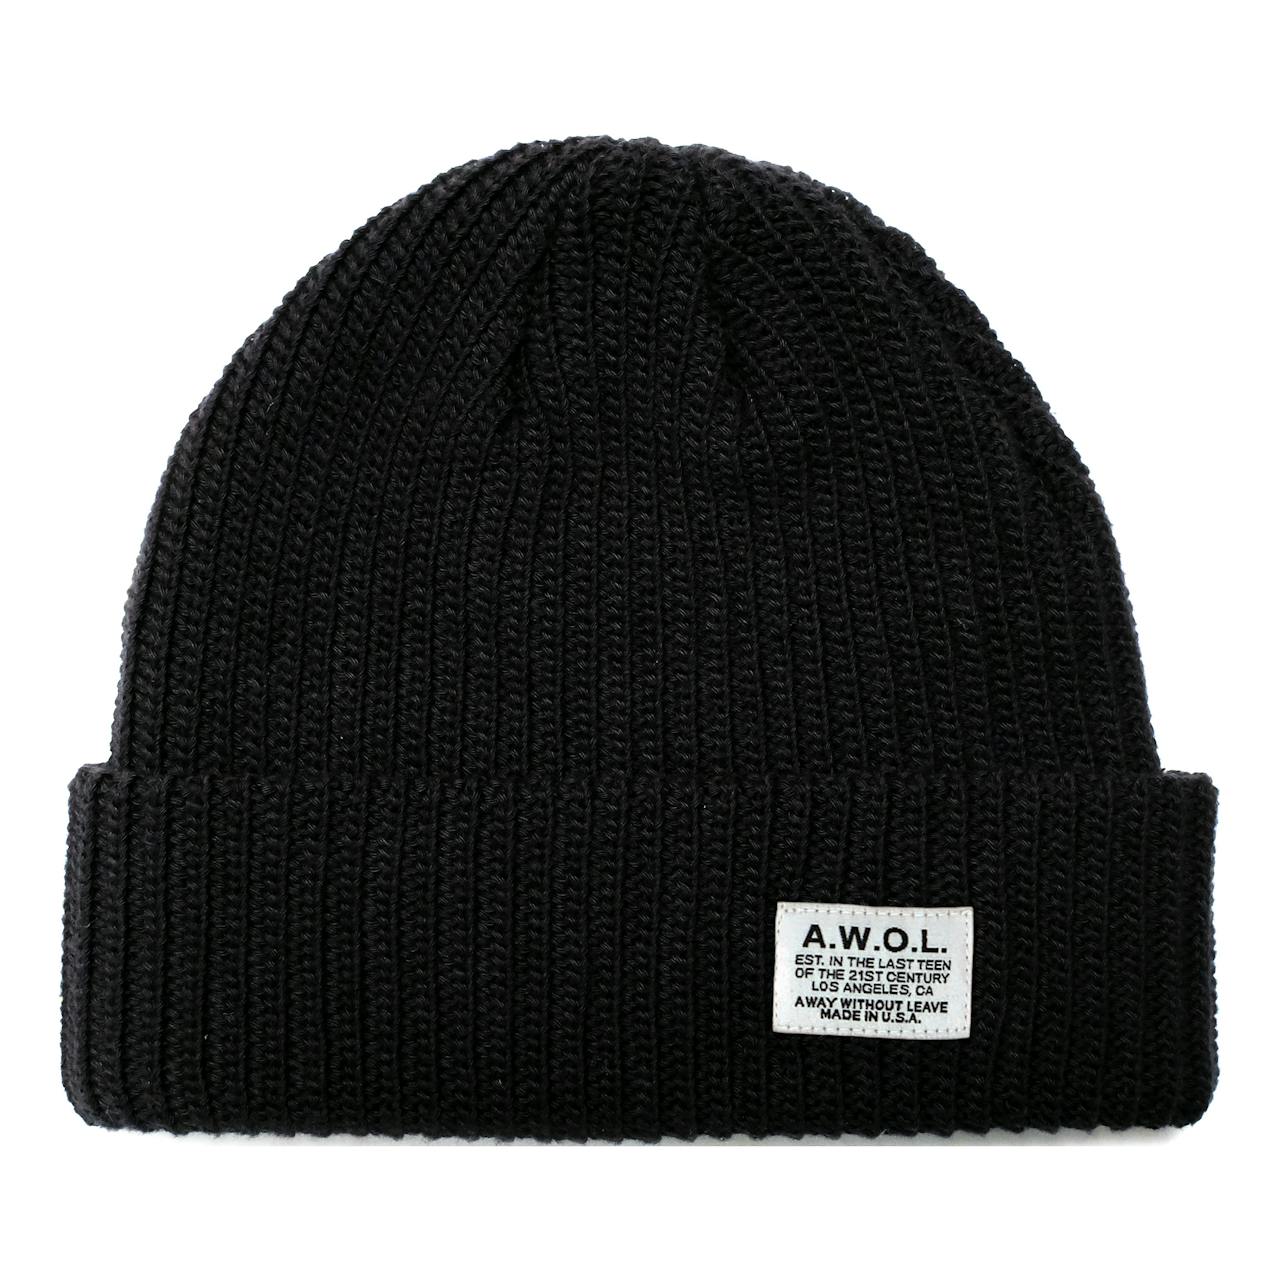 Away Without Leave Fisherman Beanie